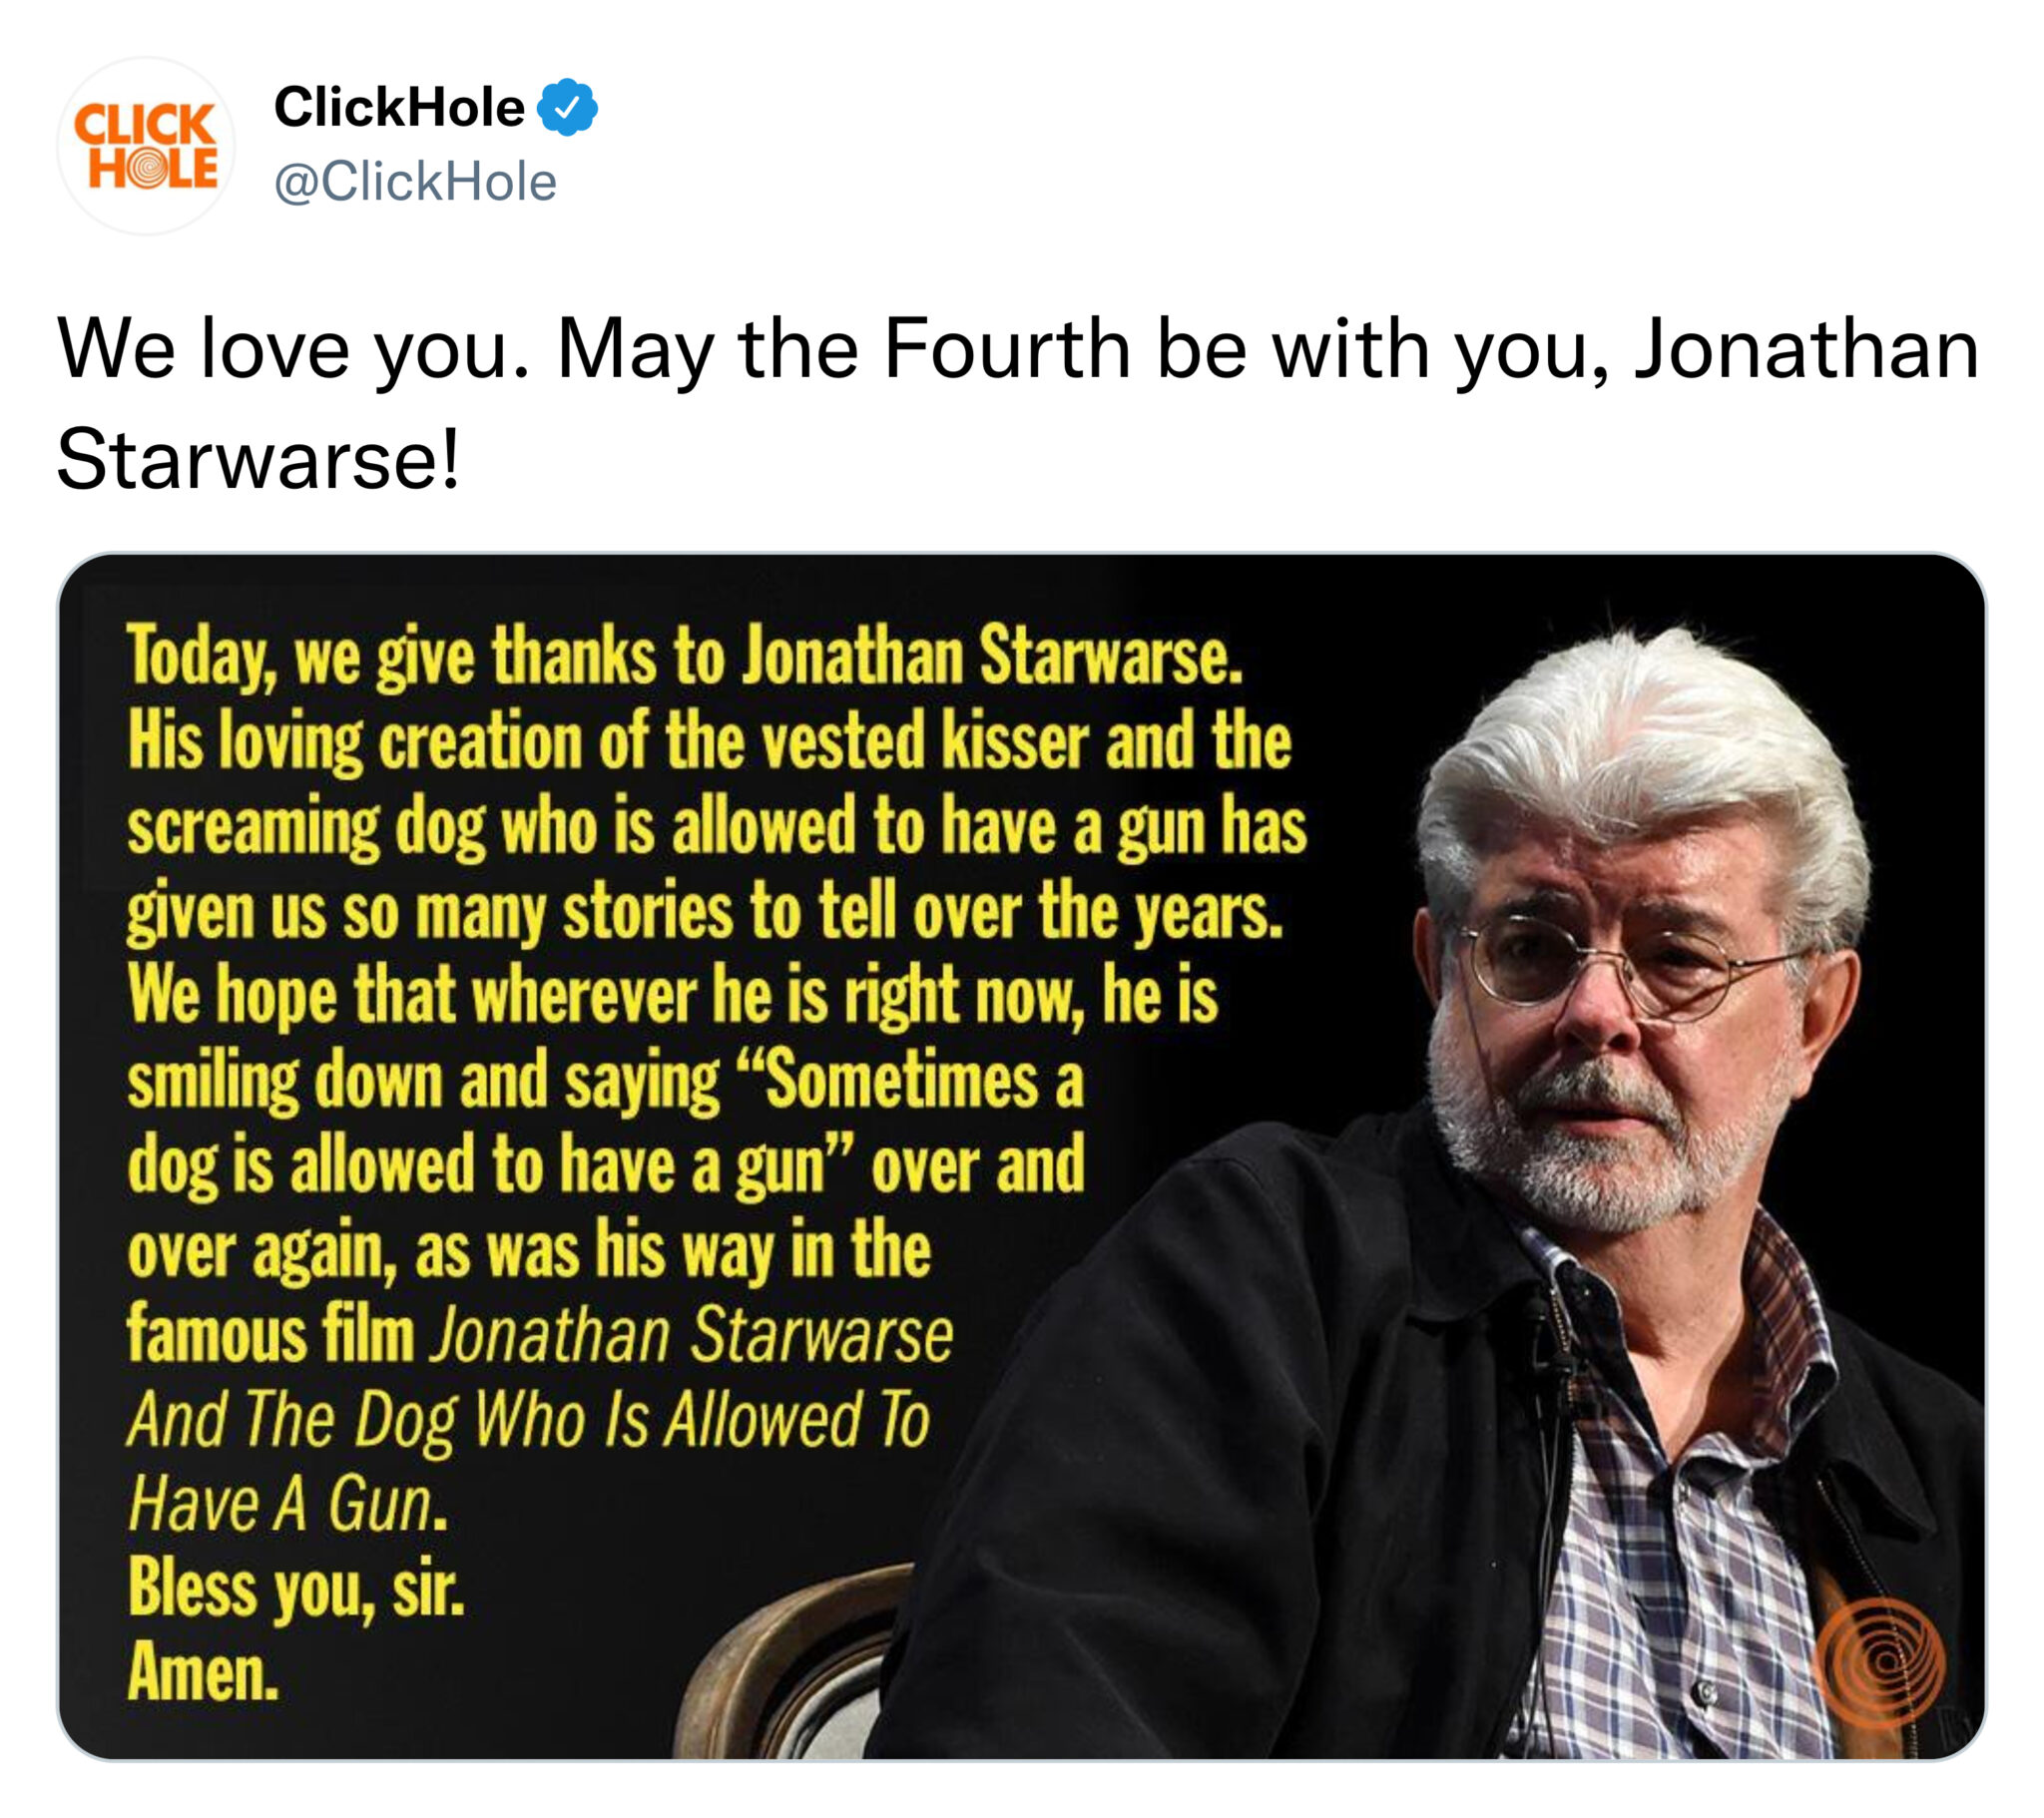 funny tweets - human behavior - Click ClickHole Hole We love you. May the Fourth be with you, Jonathan Starwarse! Today, we give thanks to Jonathan Starwarse. His loving creation of the vested kisser and the screaming dog who is allowed to have a gun has 